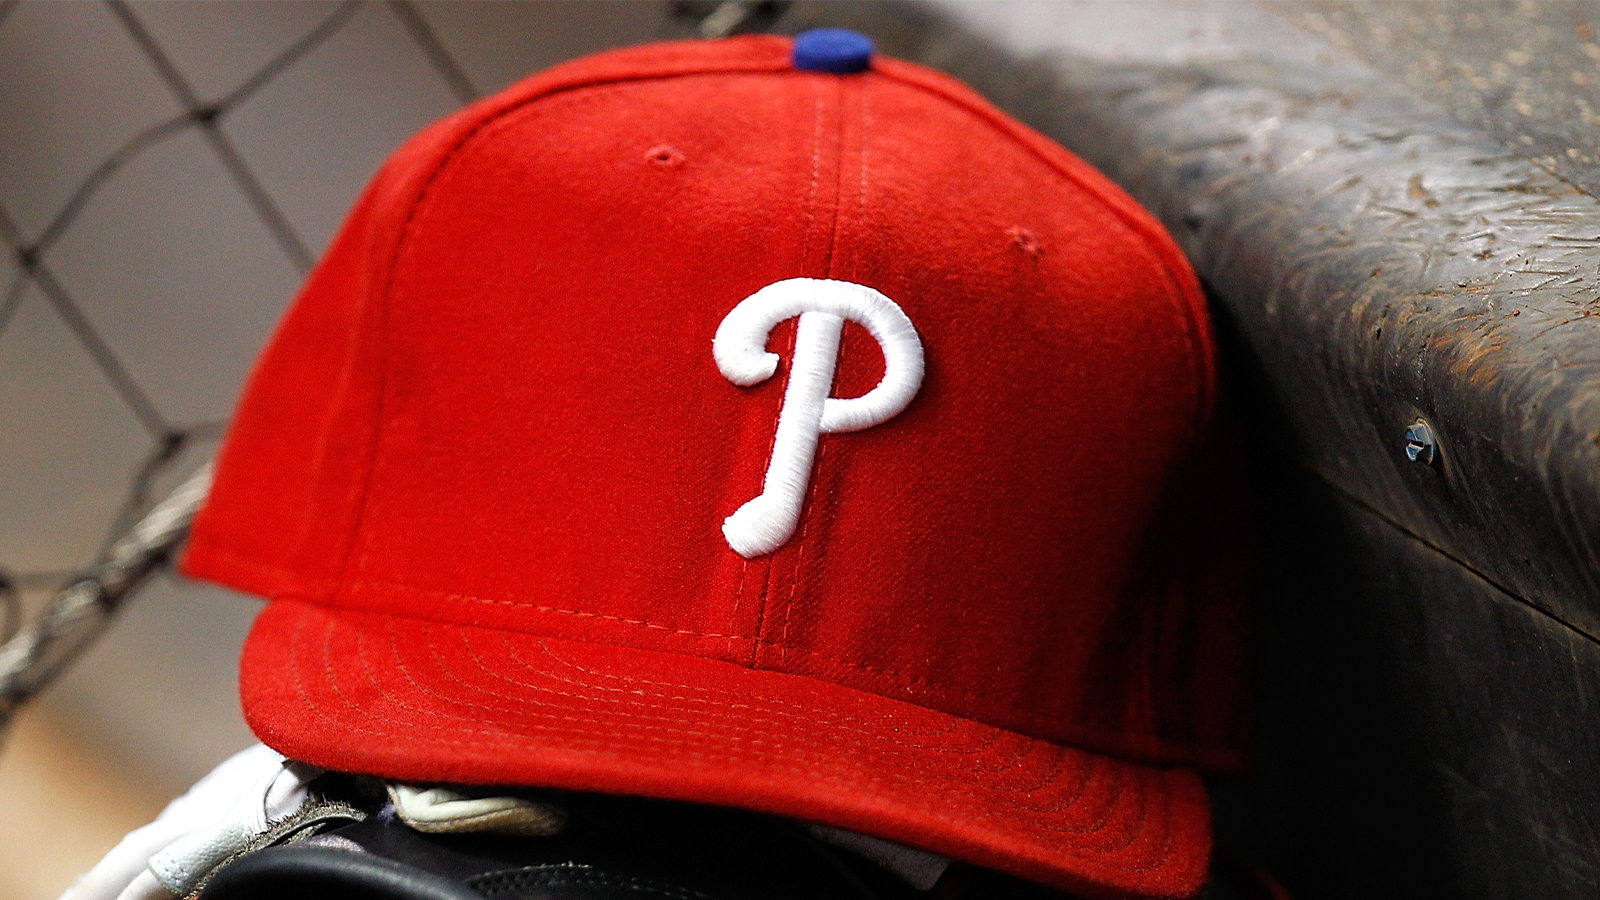 Phillies World Series Wins Are Linked With Economic Downturns